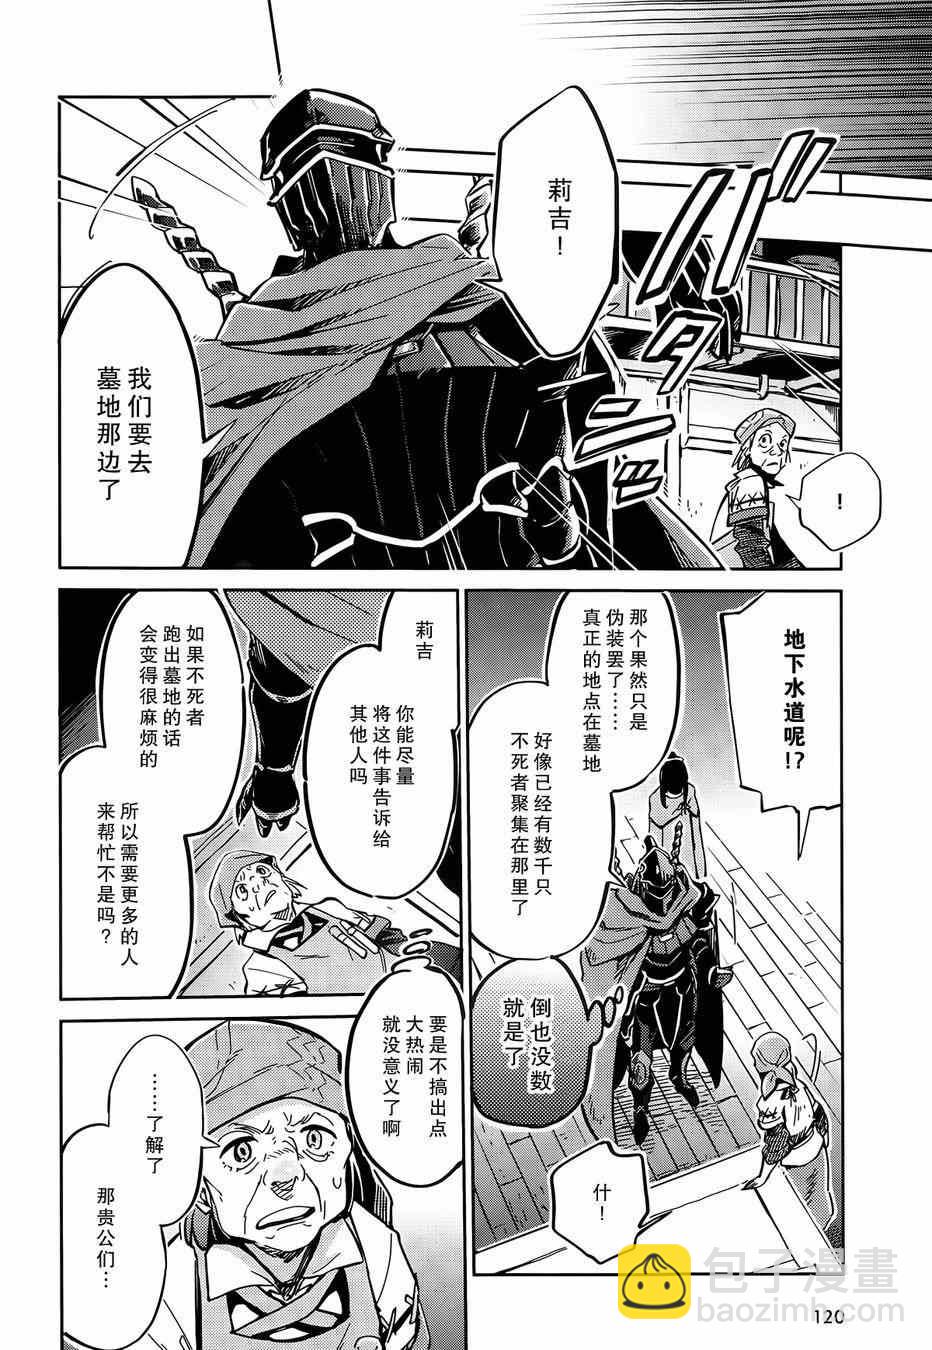 OVERLORD - 第7話 - 6